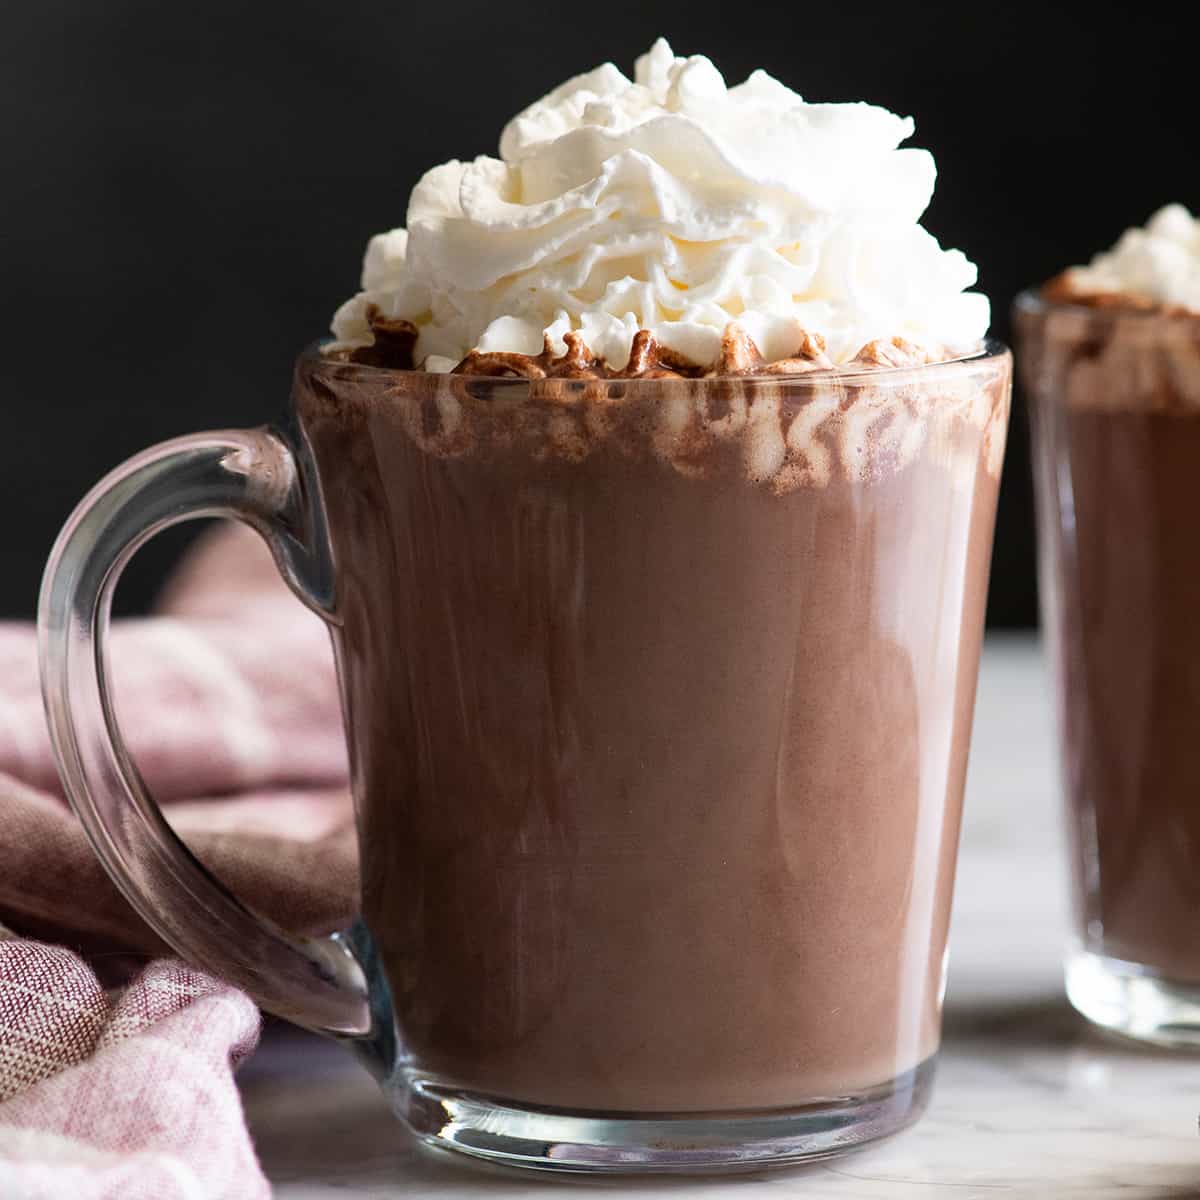 front view of a mug of homemade hot chocolate with whipped cream